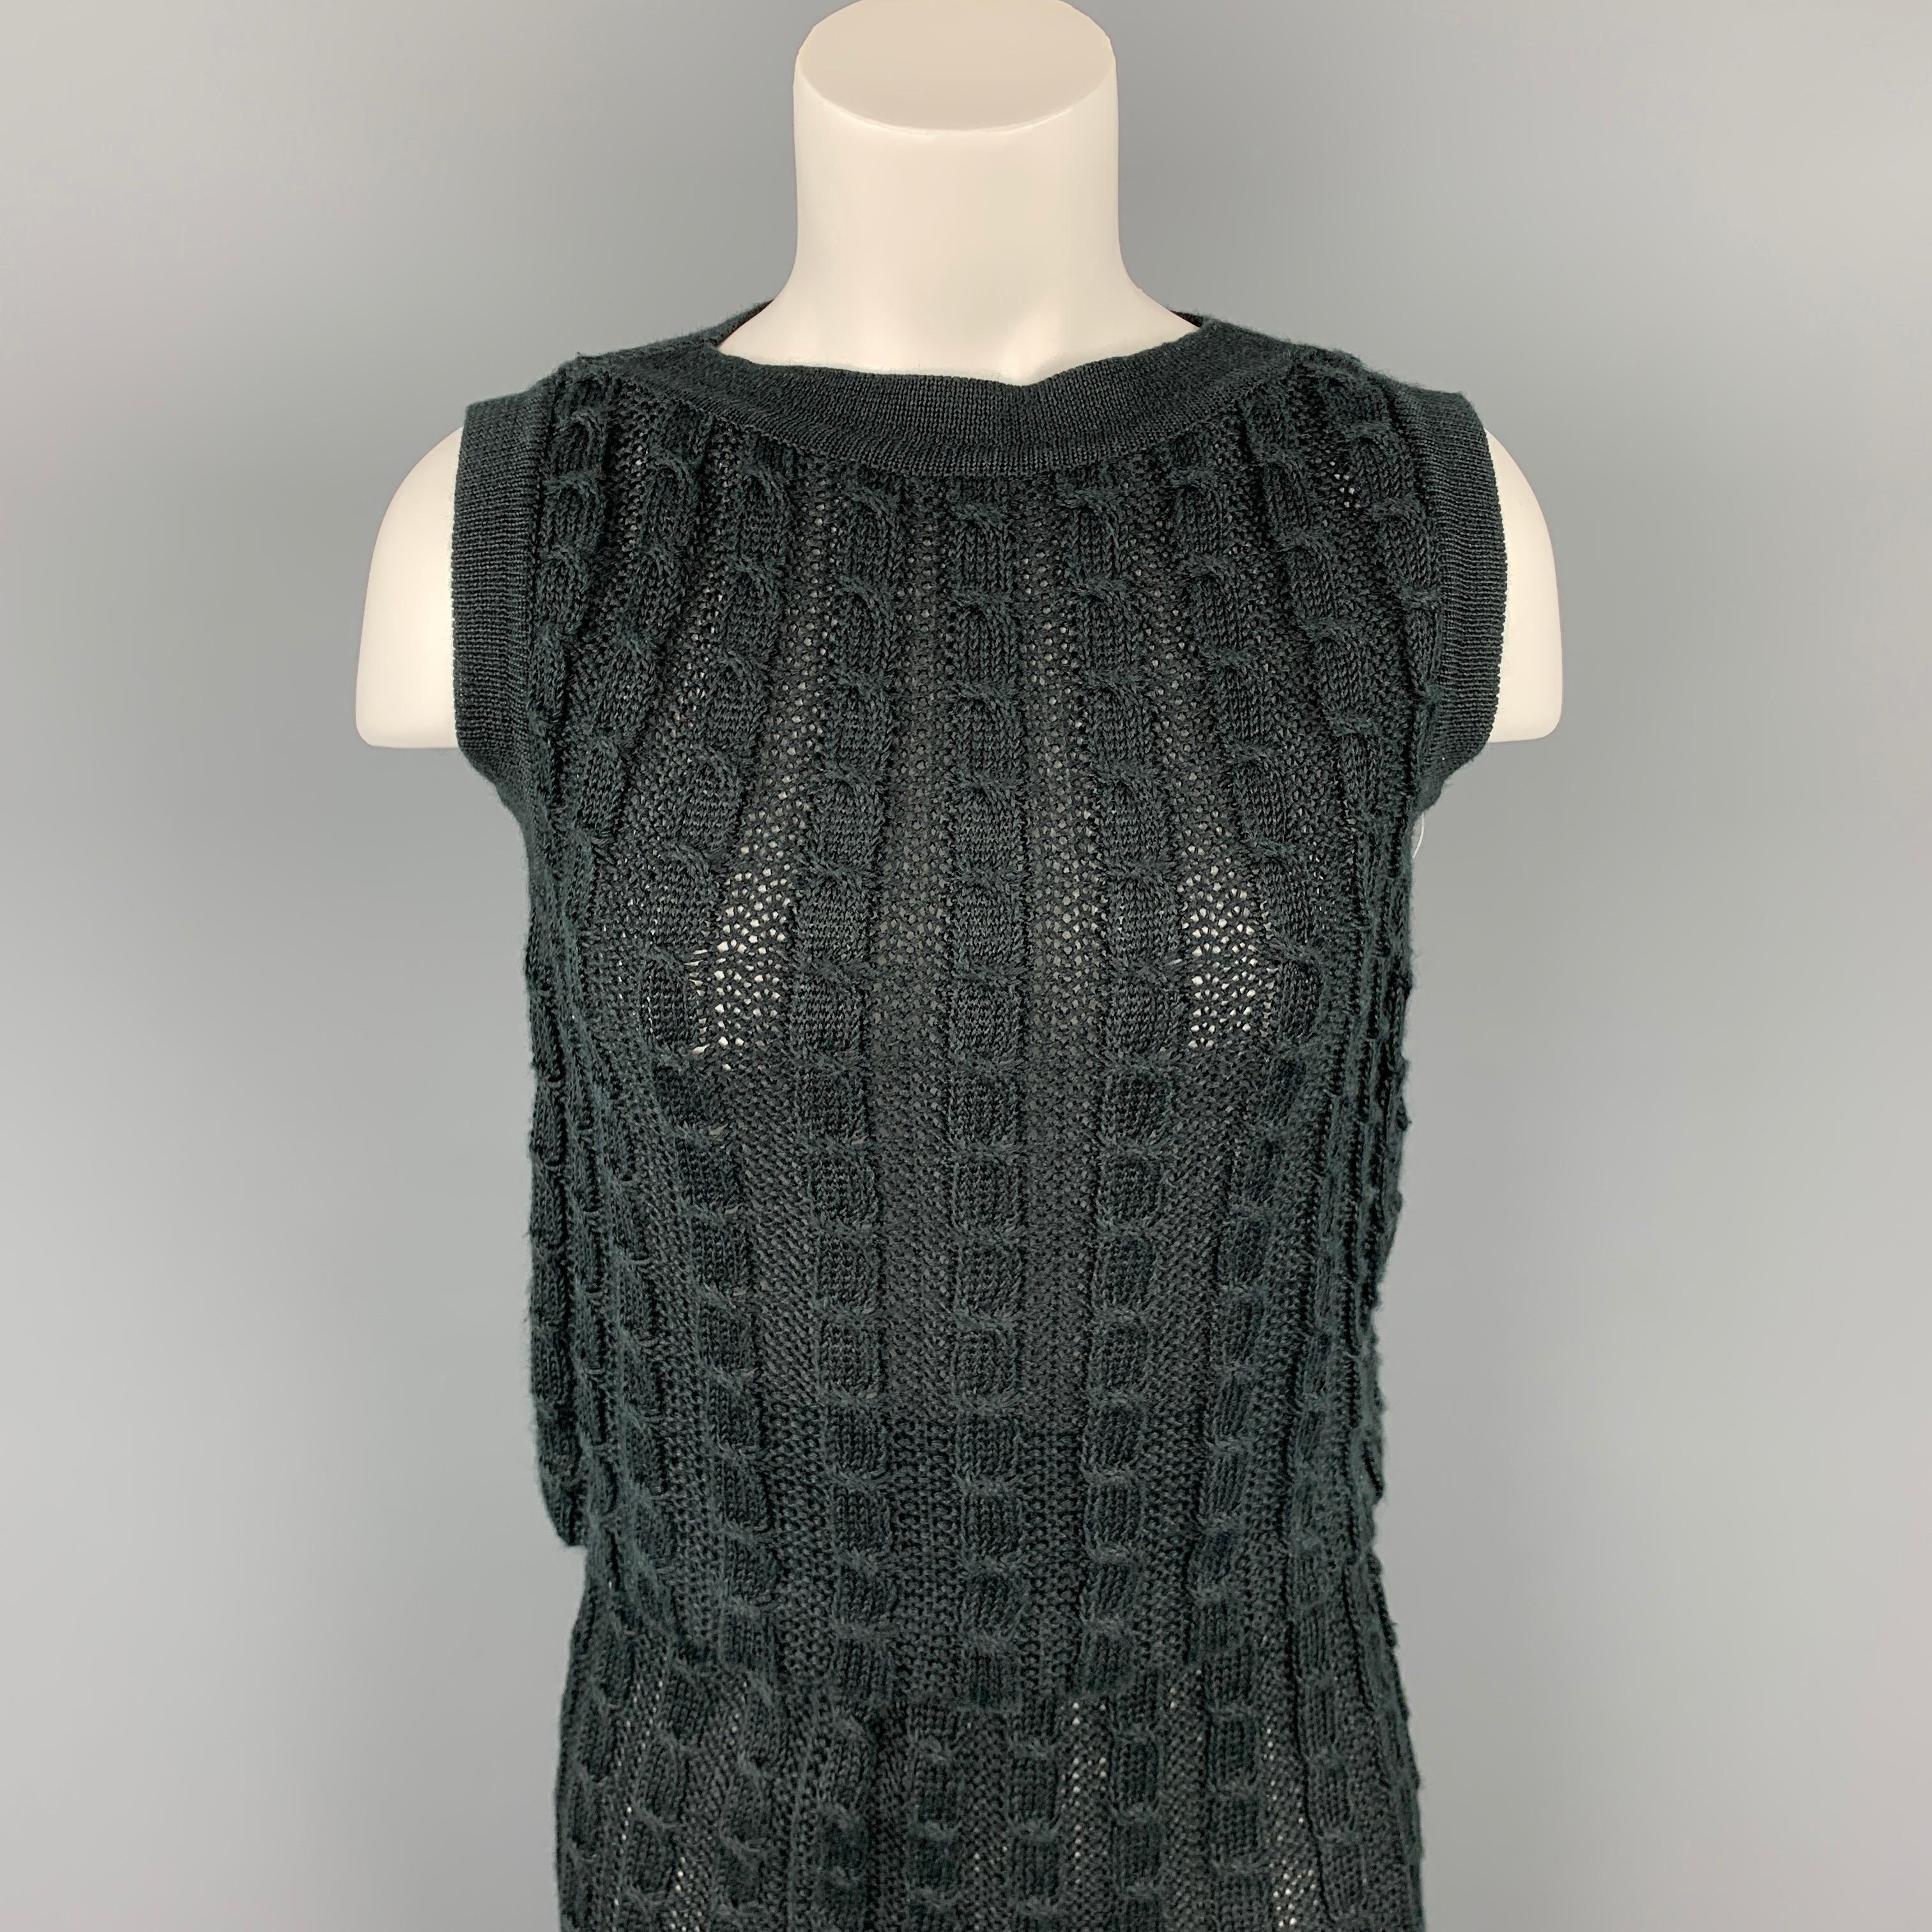 JUNKO SHIMADA skirt set comes in a charcoal knitted linen featuring a sleeveless style, crew-neck, and a match pencil skirt. Made in Japan.

Very Good Pre-Owned Condition.
Marked: 9

Measurements:

-Top
Shoulder: 14.5 in.
Bust: 32 in.
Length: 17.5